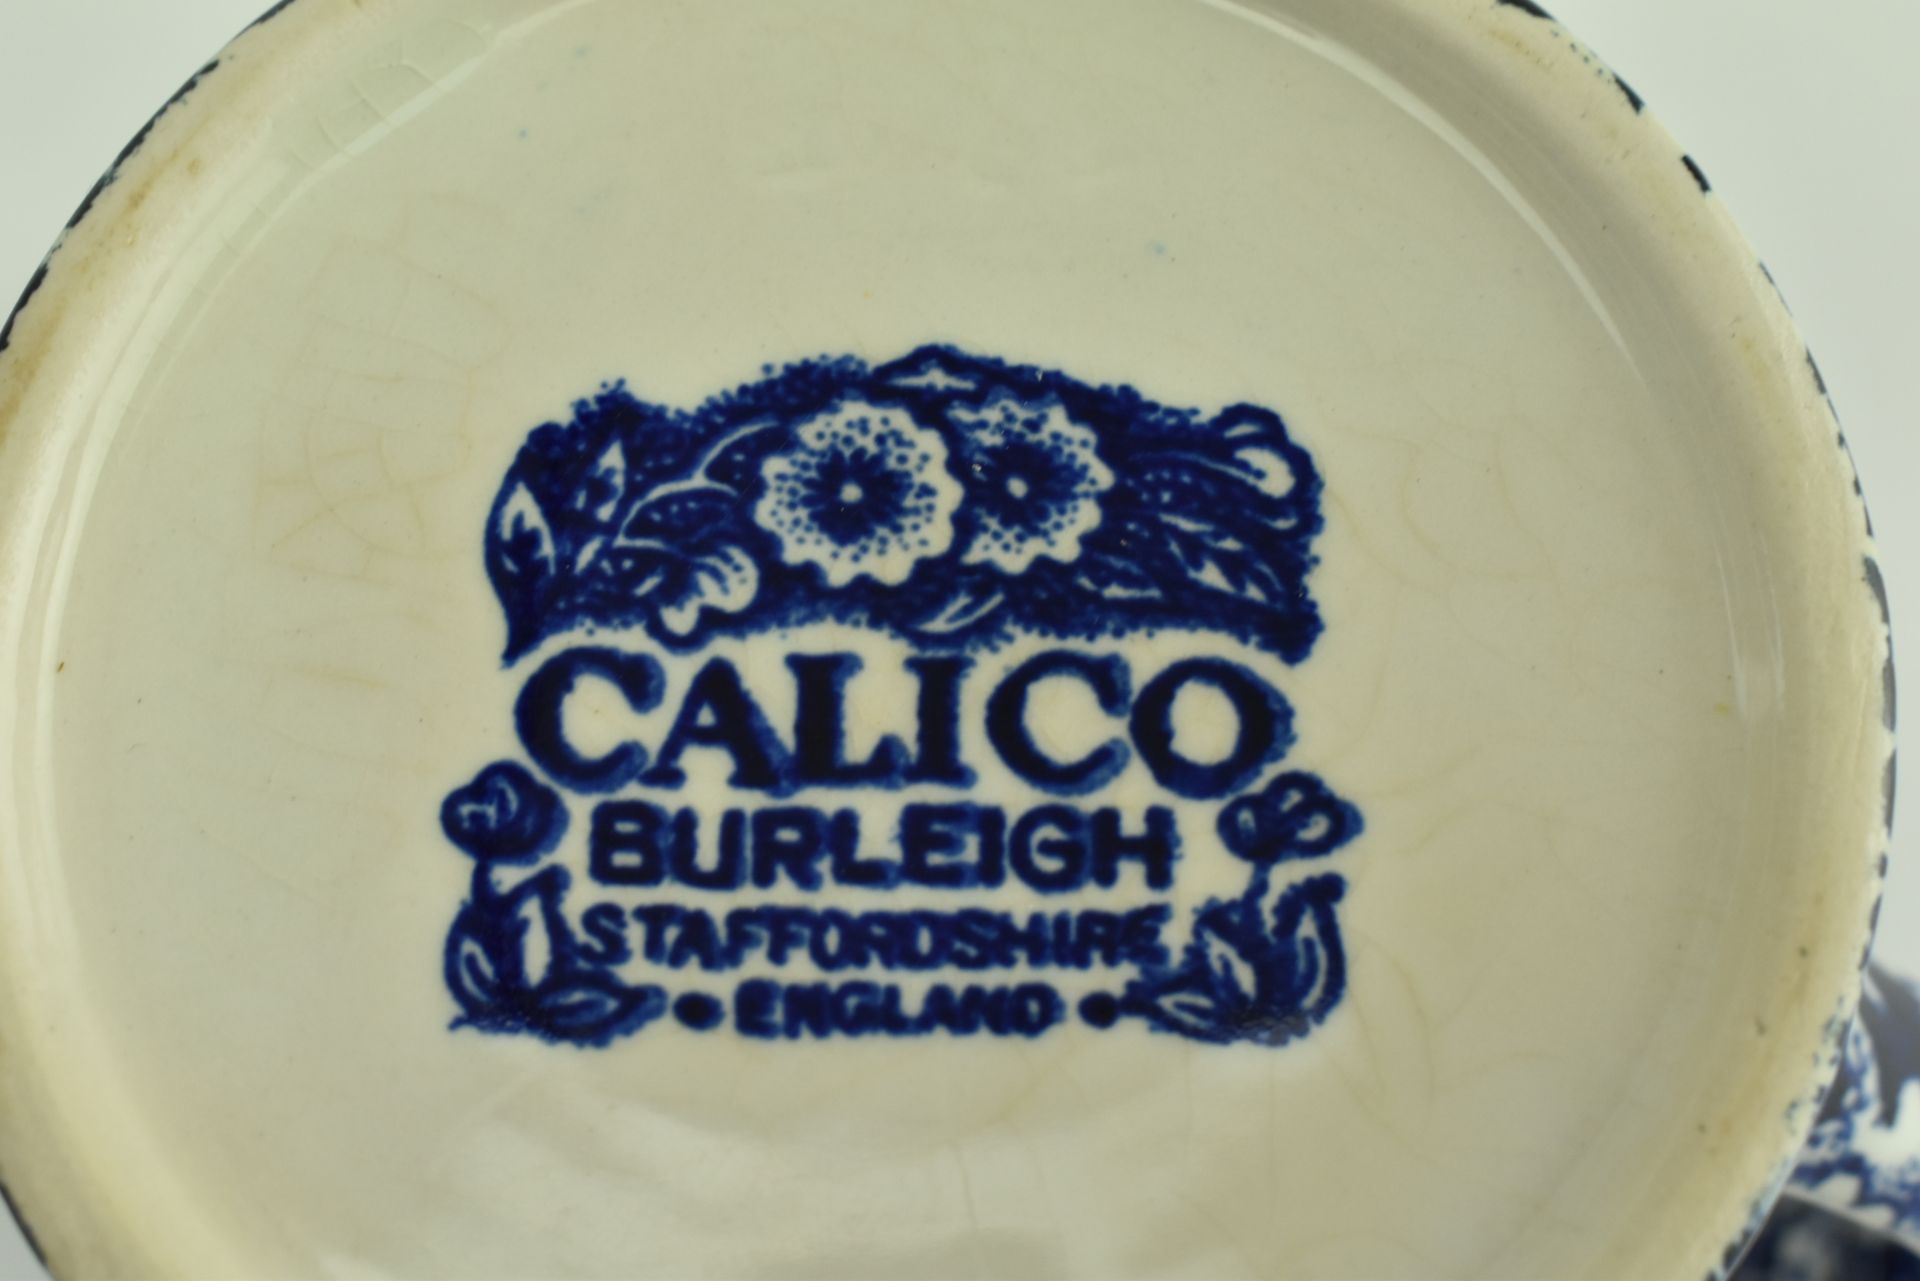 SELECTION OF BLUE AND WHITE BURLEIGH CERAMIC TABLEWARES - Image 8 of 15